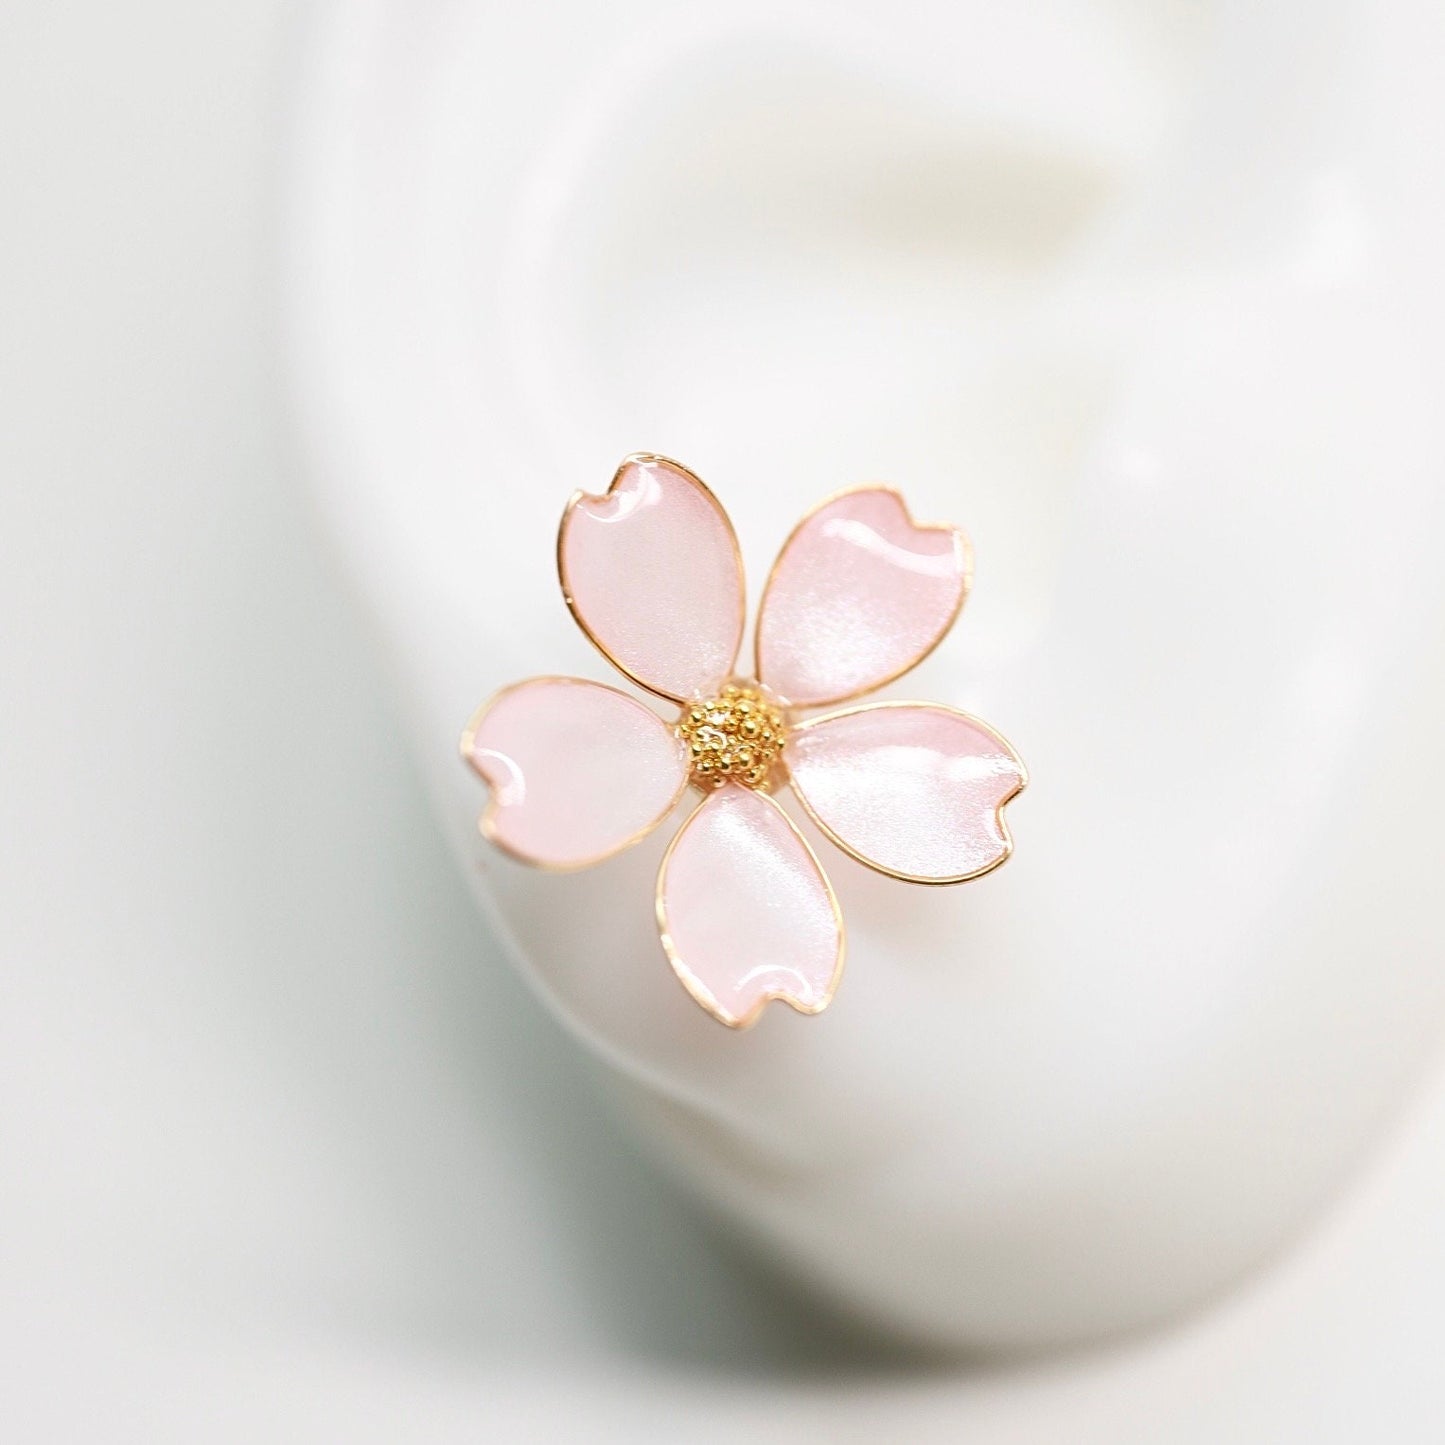 Handmade Wire Resin Cherry Blossom Stud Earrings, Spring Theme Floral Pearlescent Earrings, Romantic Pink Earrings